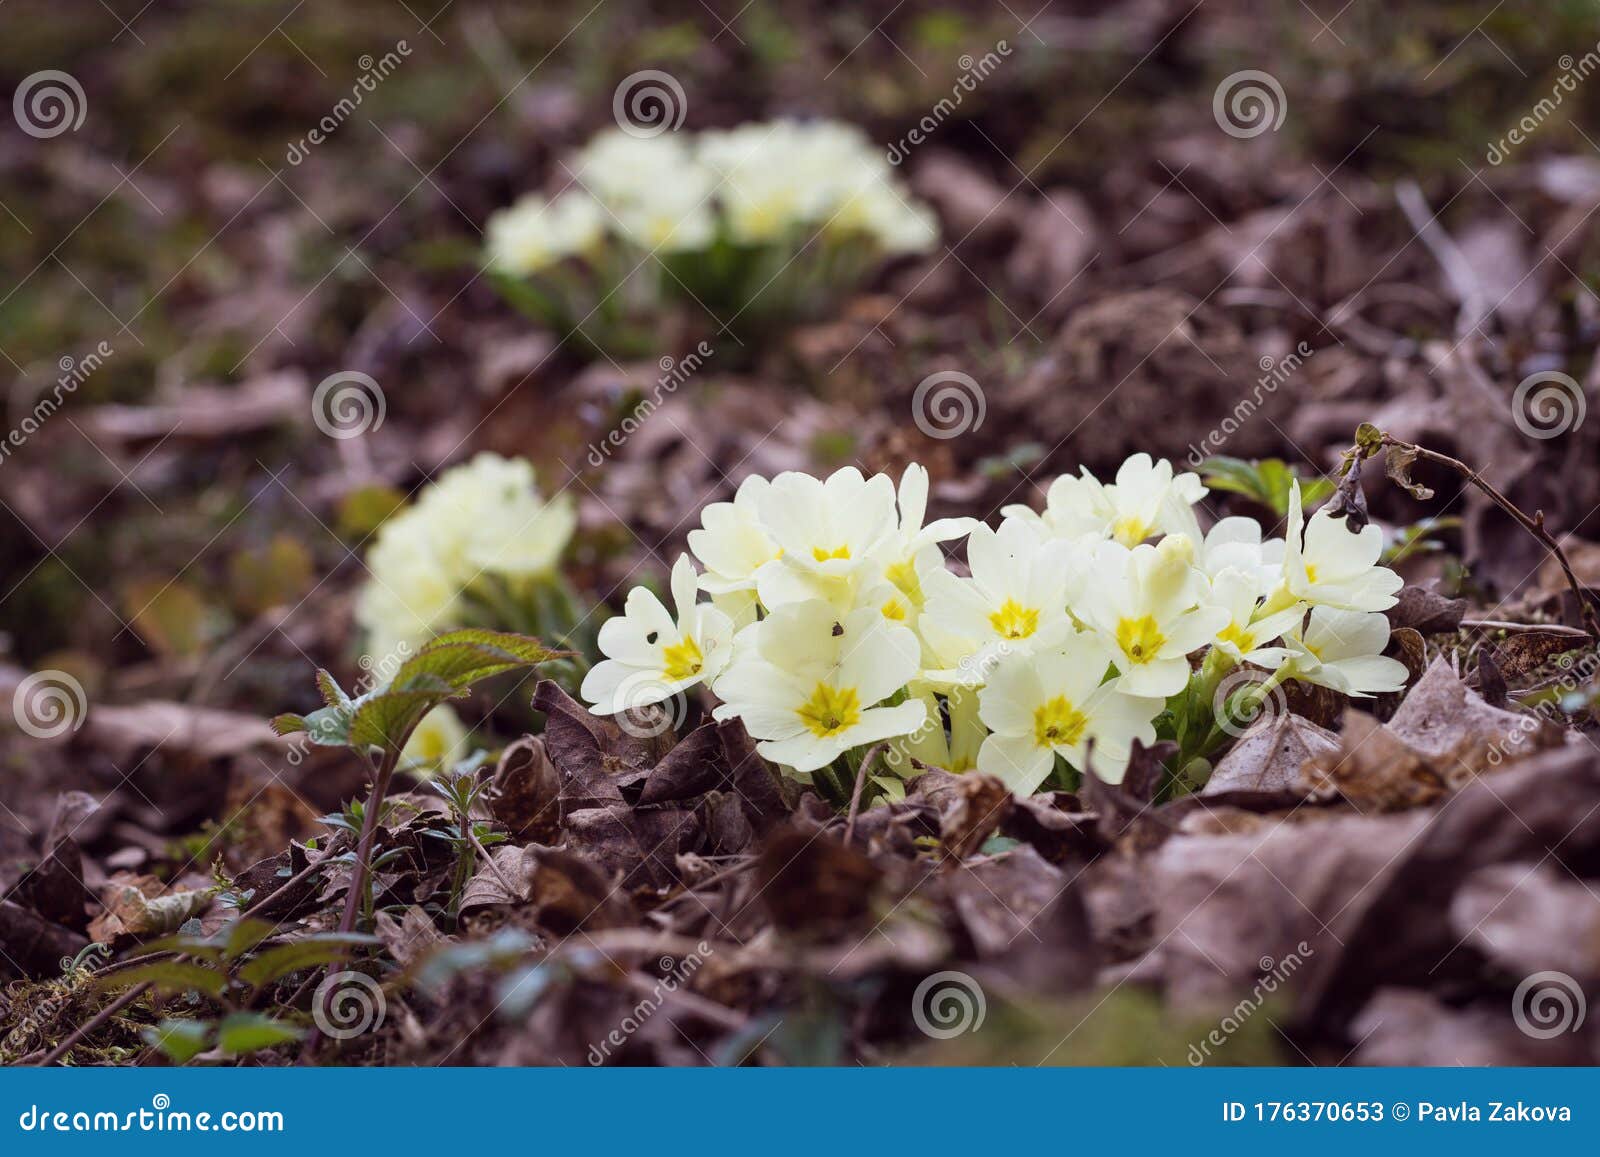 Primrose Flower In Early Spring Stock Image Image Of Native Natural 176370653